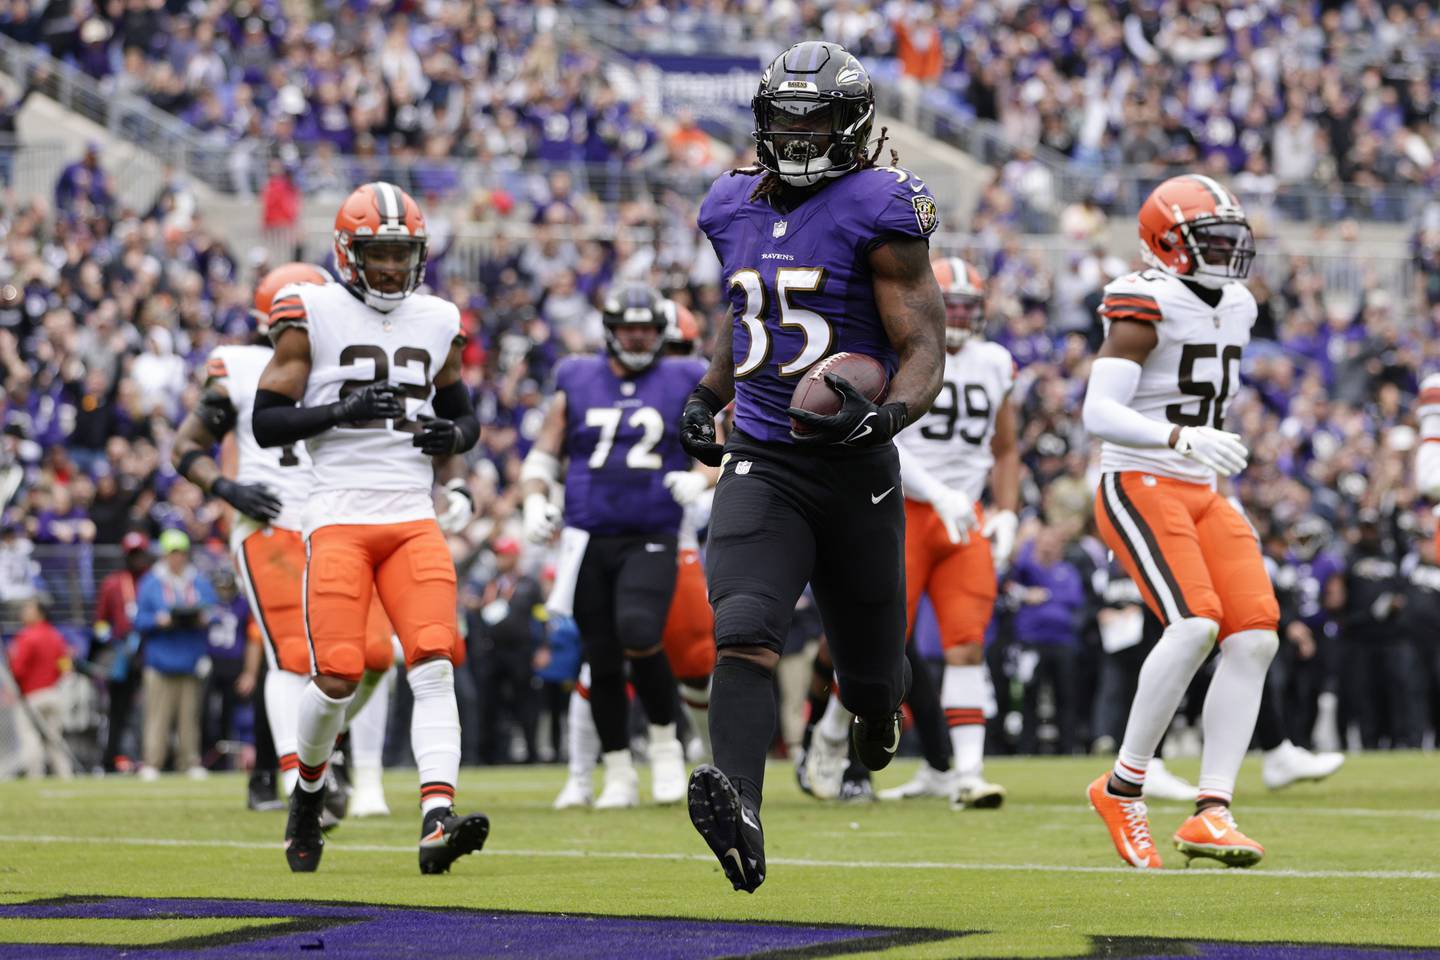 Baltimore Ravens running back Gus Edwards (35) scores a touchdown on a 7 yard run during the second quarter against the Cleveland Browns in an NFL football game, Sunday, Oct. 23, 2022, in Baltimore.